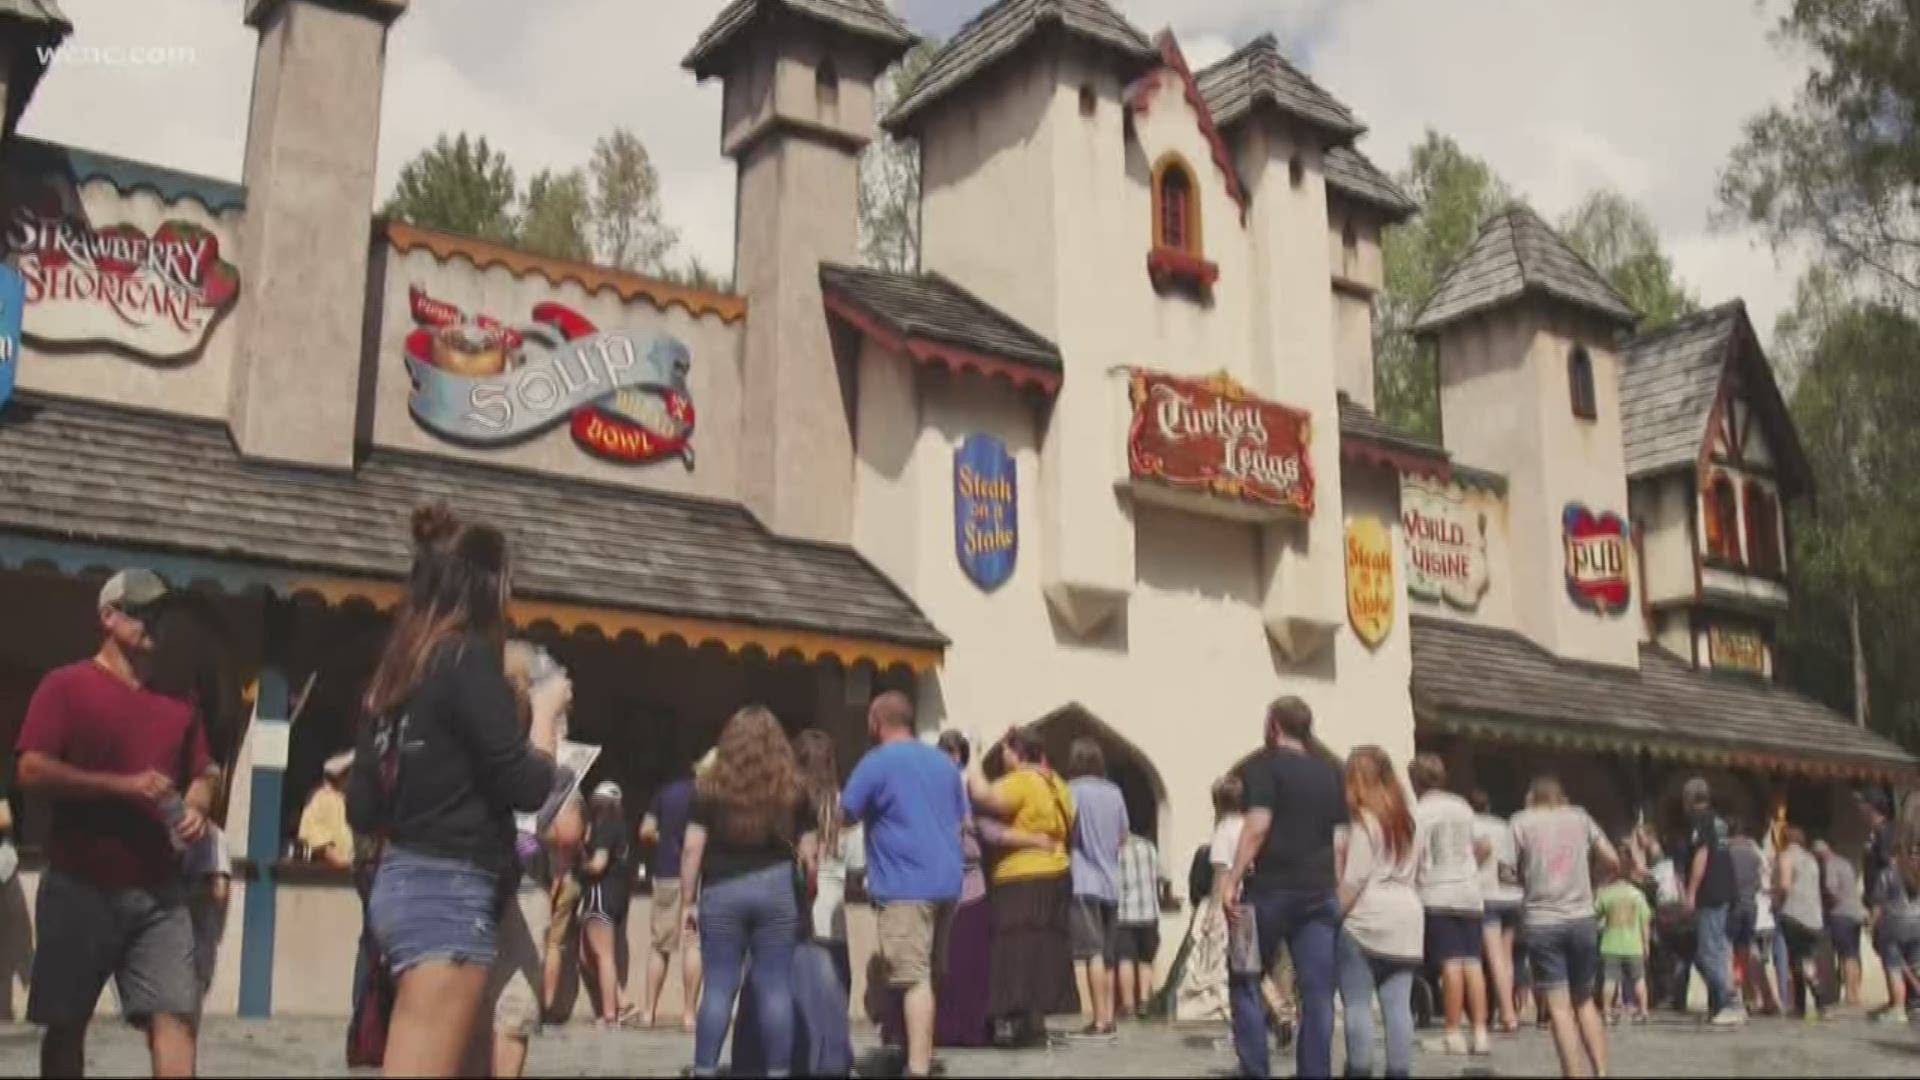 Eugene checks out the Carolina Renaissance Festival to see what they have in store this year.